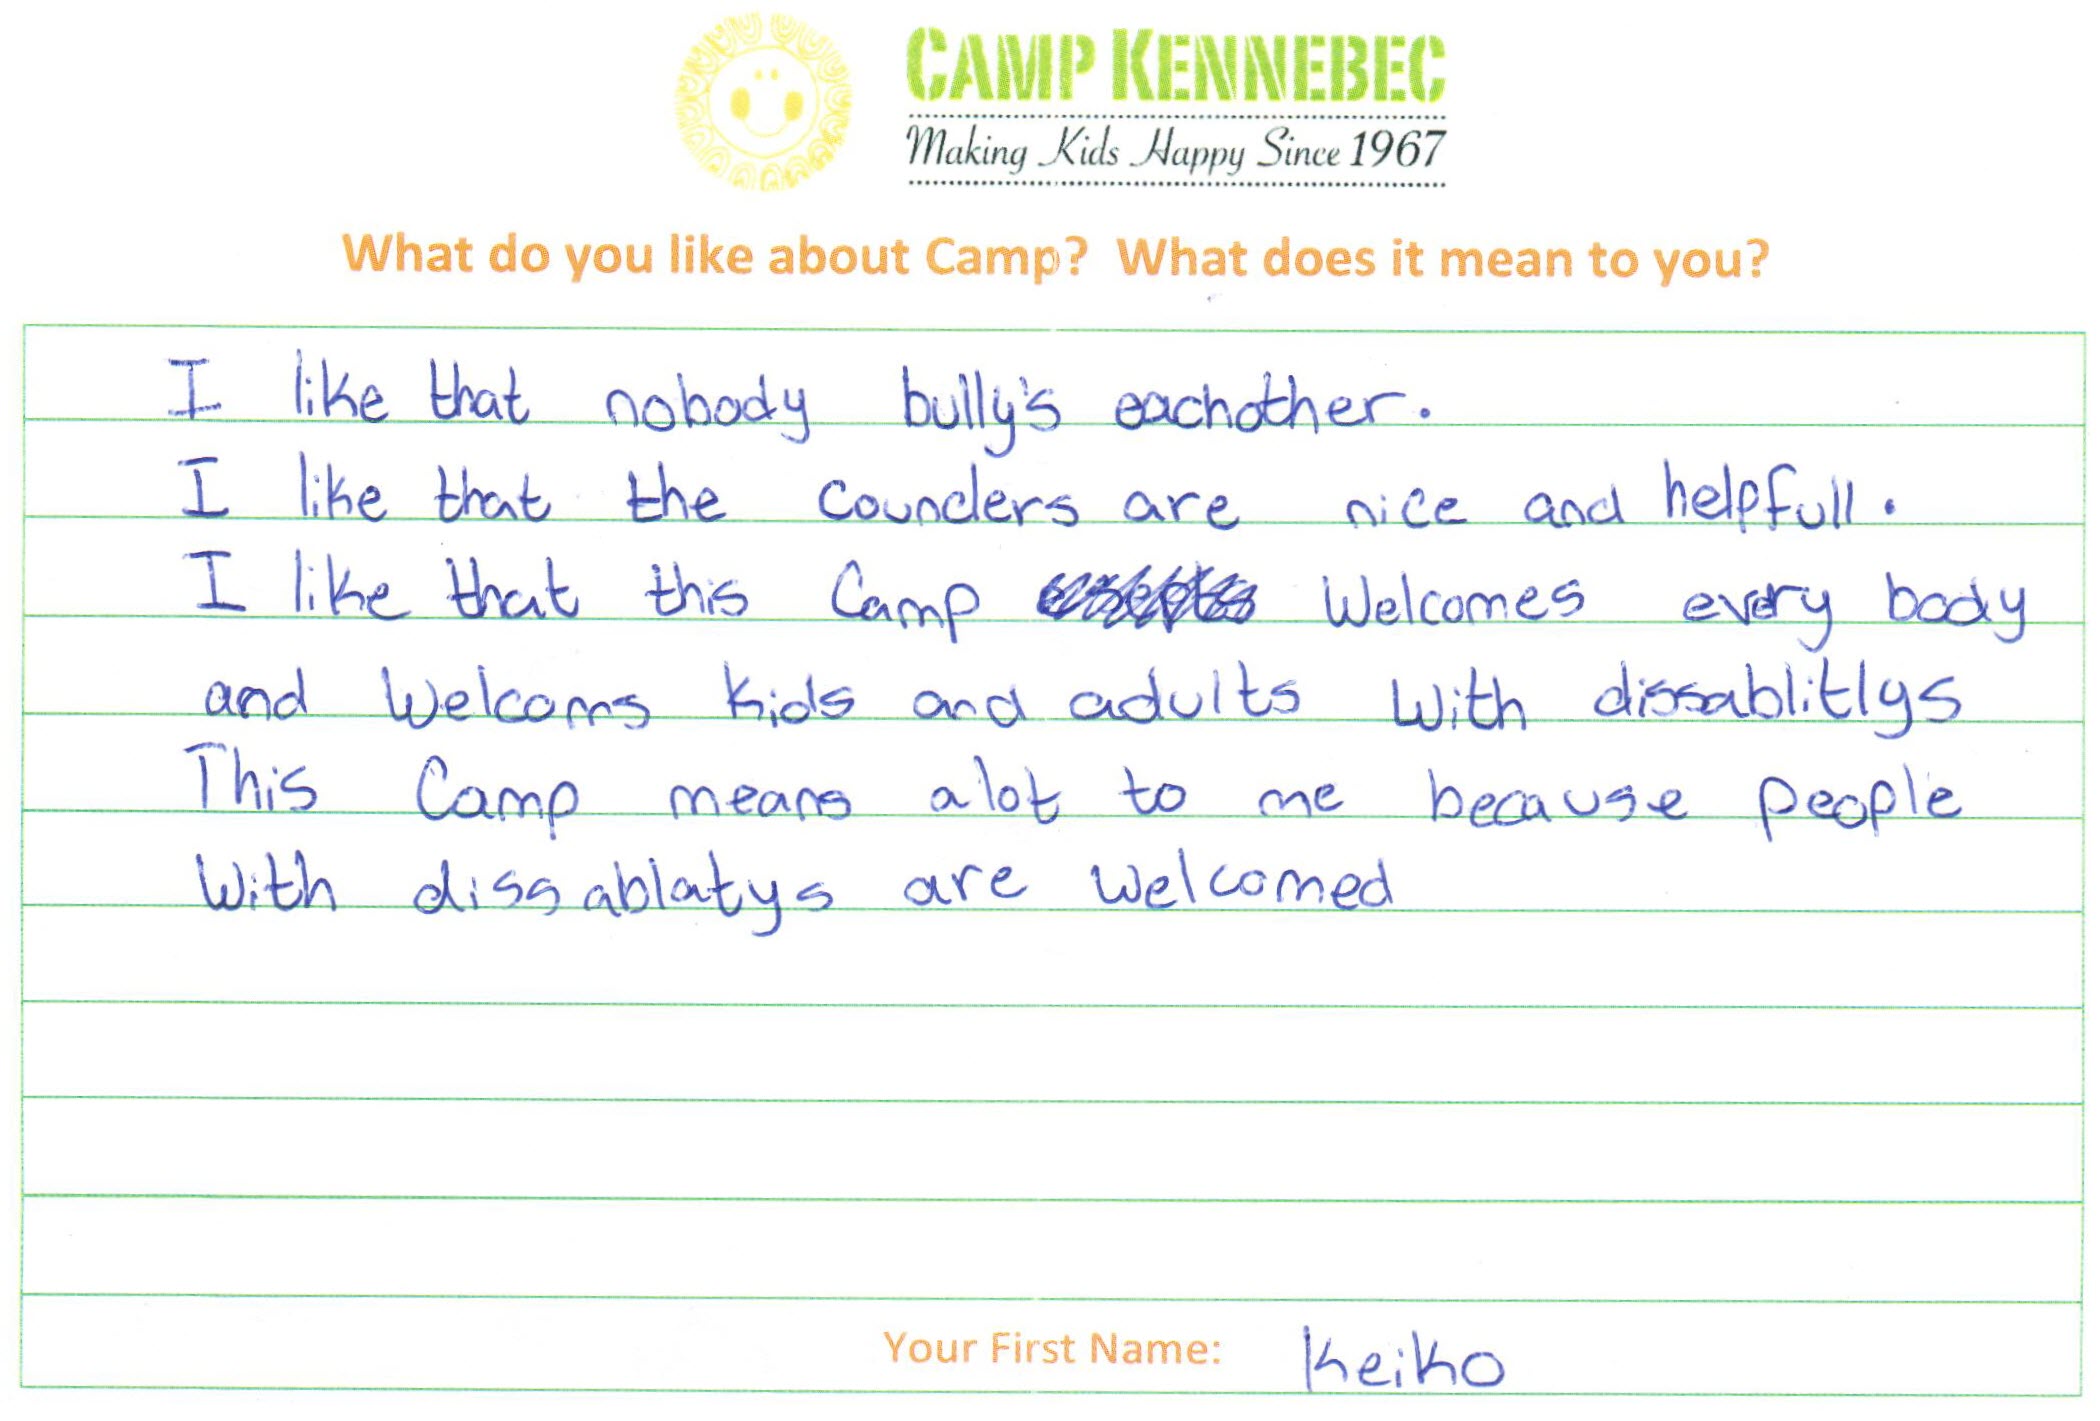 Camp Kennebec Campers tell us what they think of camp. This is an example:I like that nobody bully's eachother. I like that the counclers are nice and helpful. I like that this camp welcomesever body and welcomes kids and adults with disabilitys. This camp means a lot to me because people with disabilitys are welcomed. -Keiko